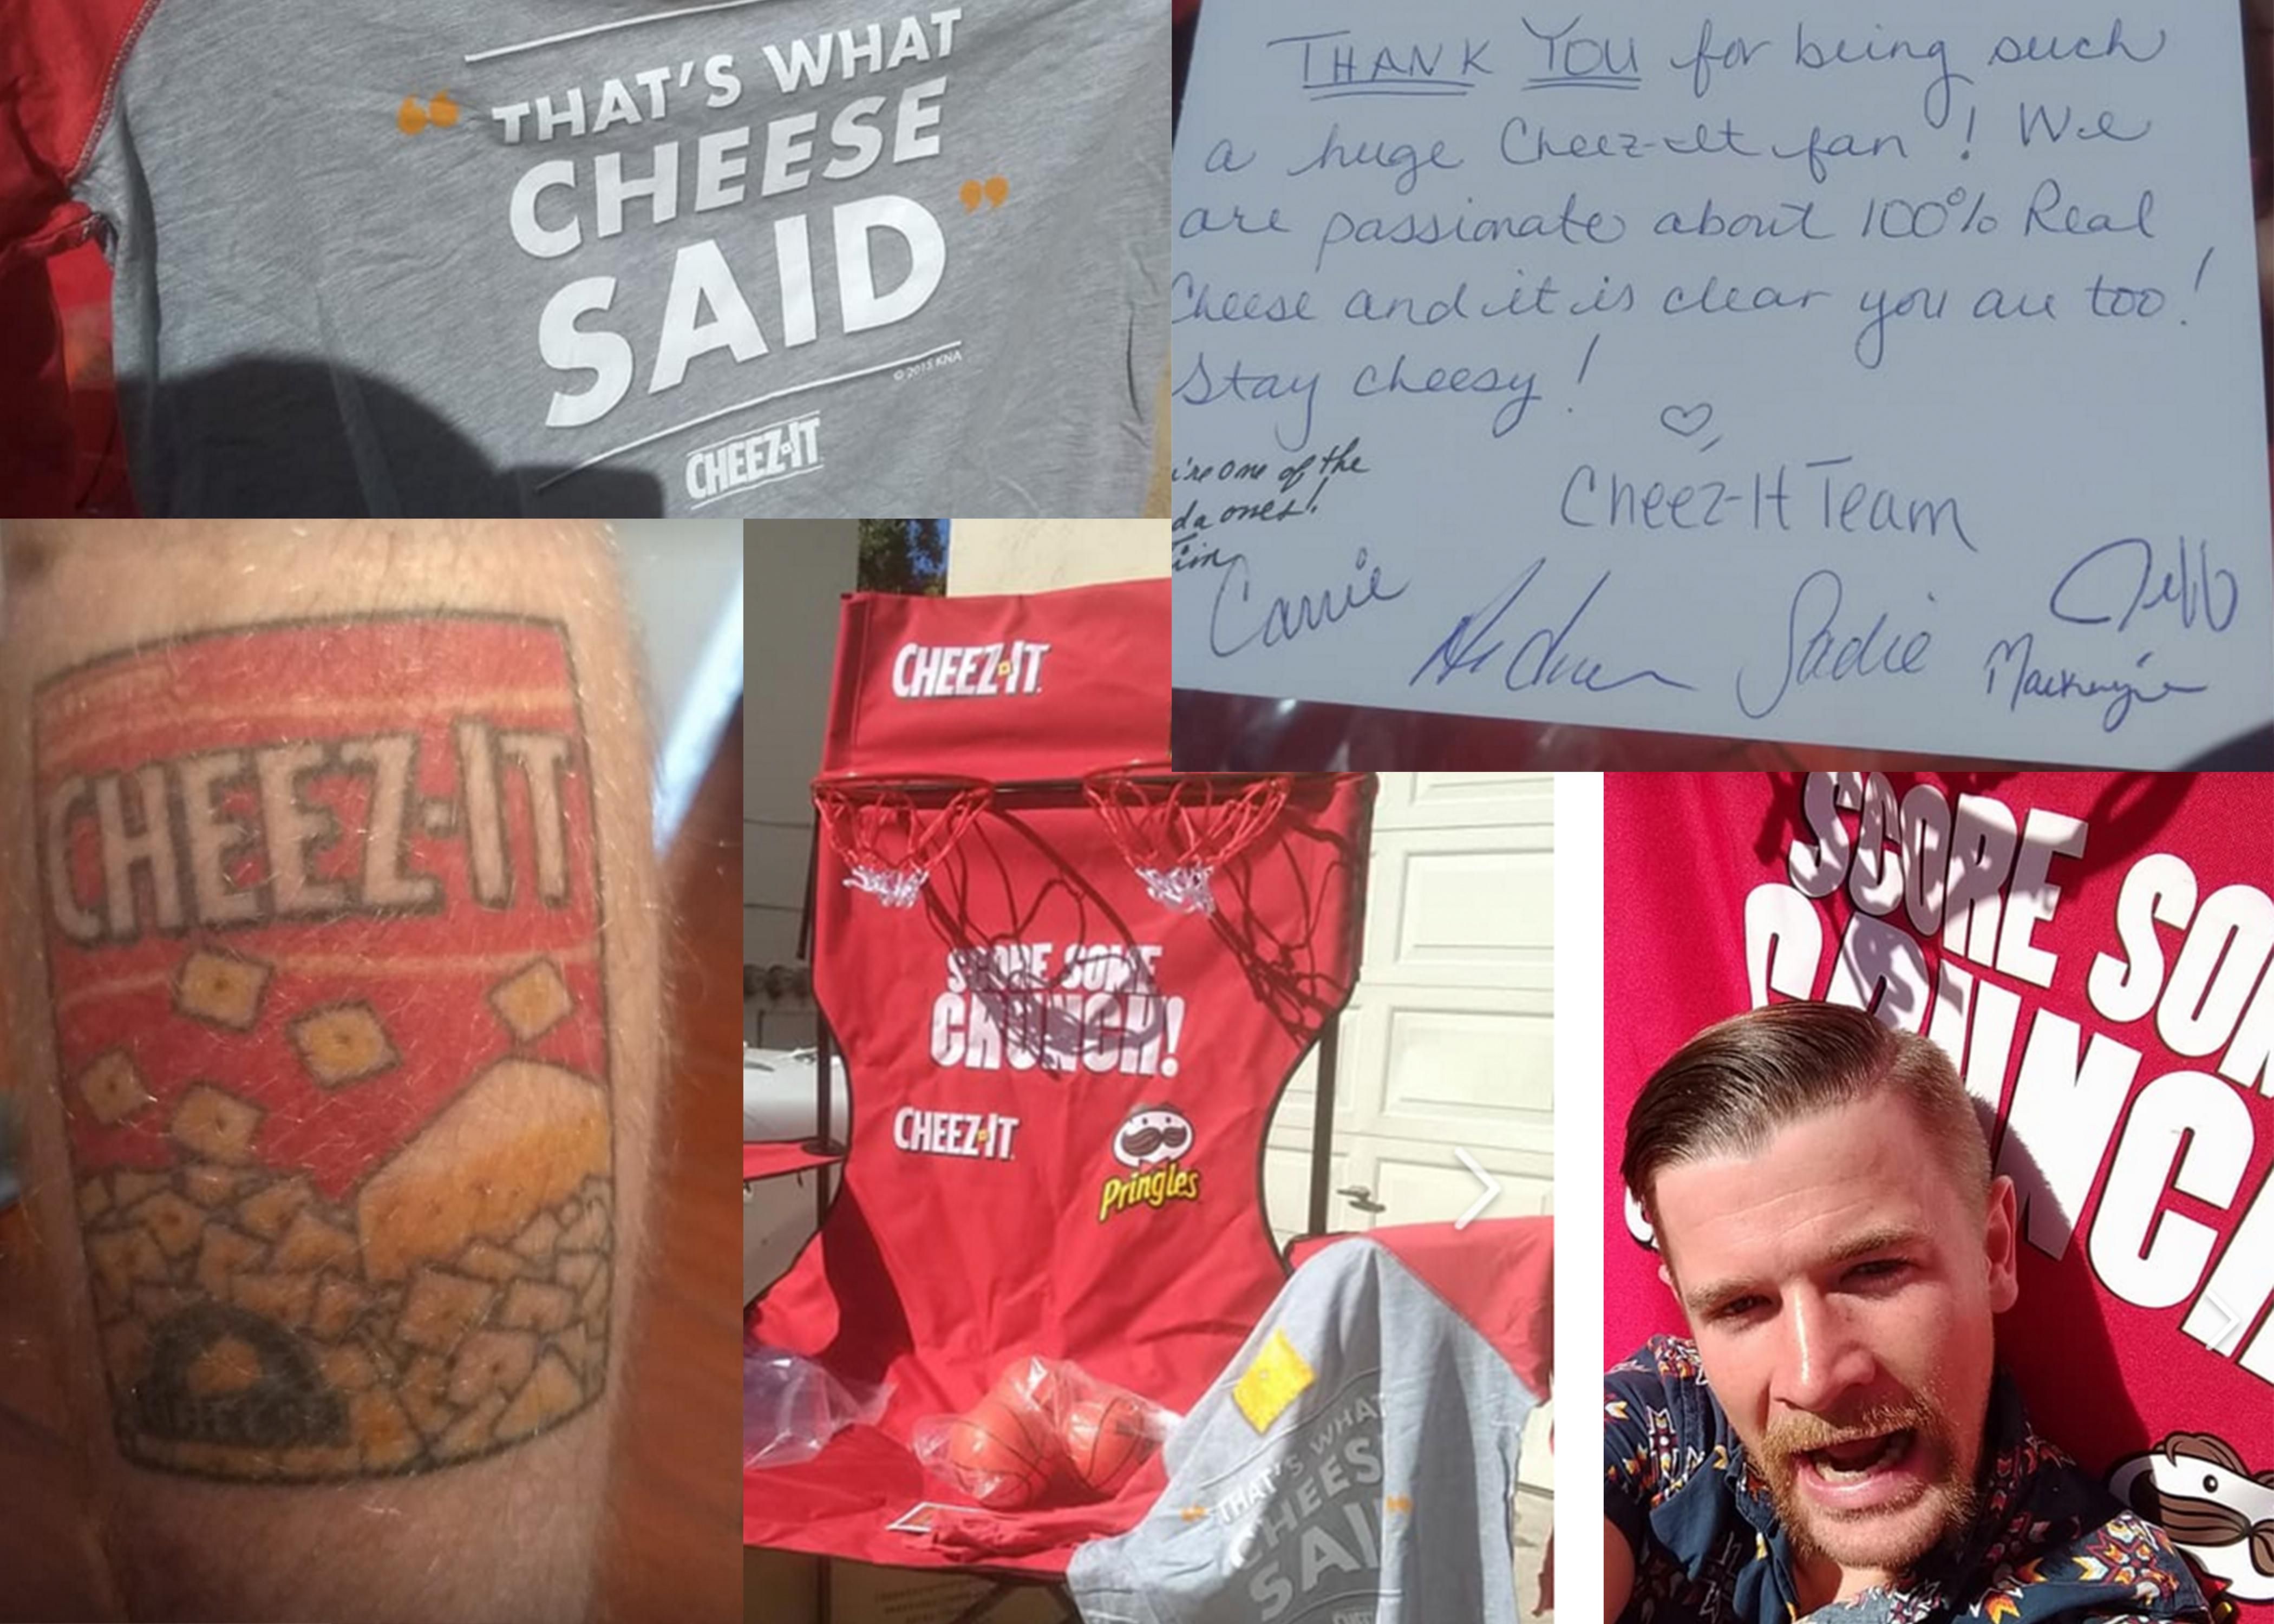 My friend has a box of "cheez its" tattooed on his leg. He met a higher up from the company on a cruise and they sent him a bunch of cheez its gear.